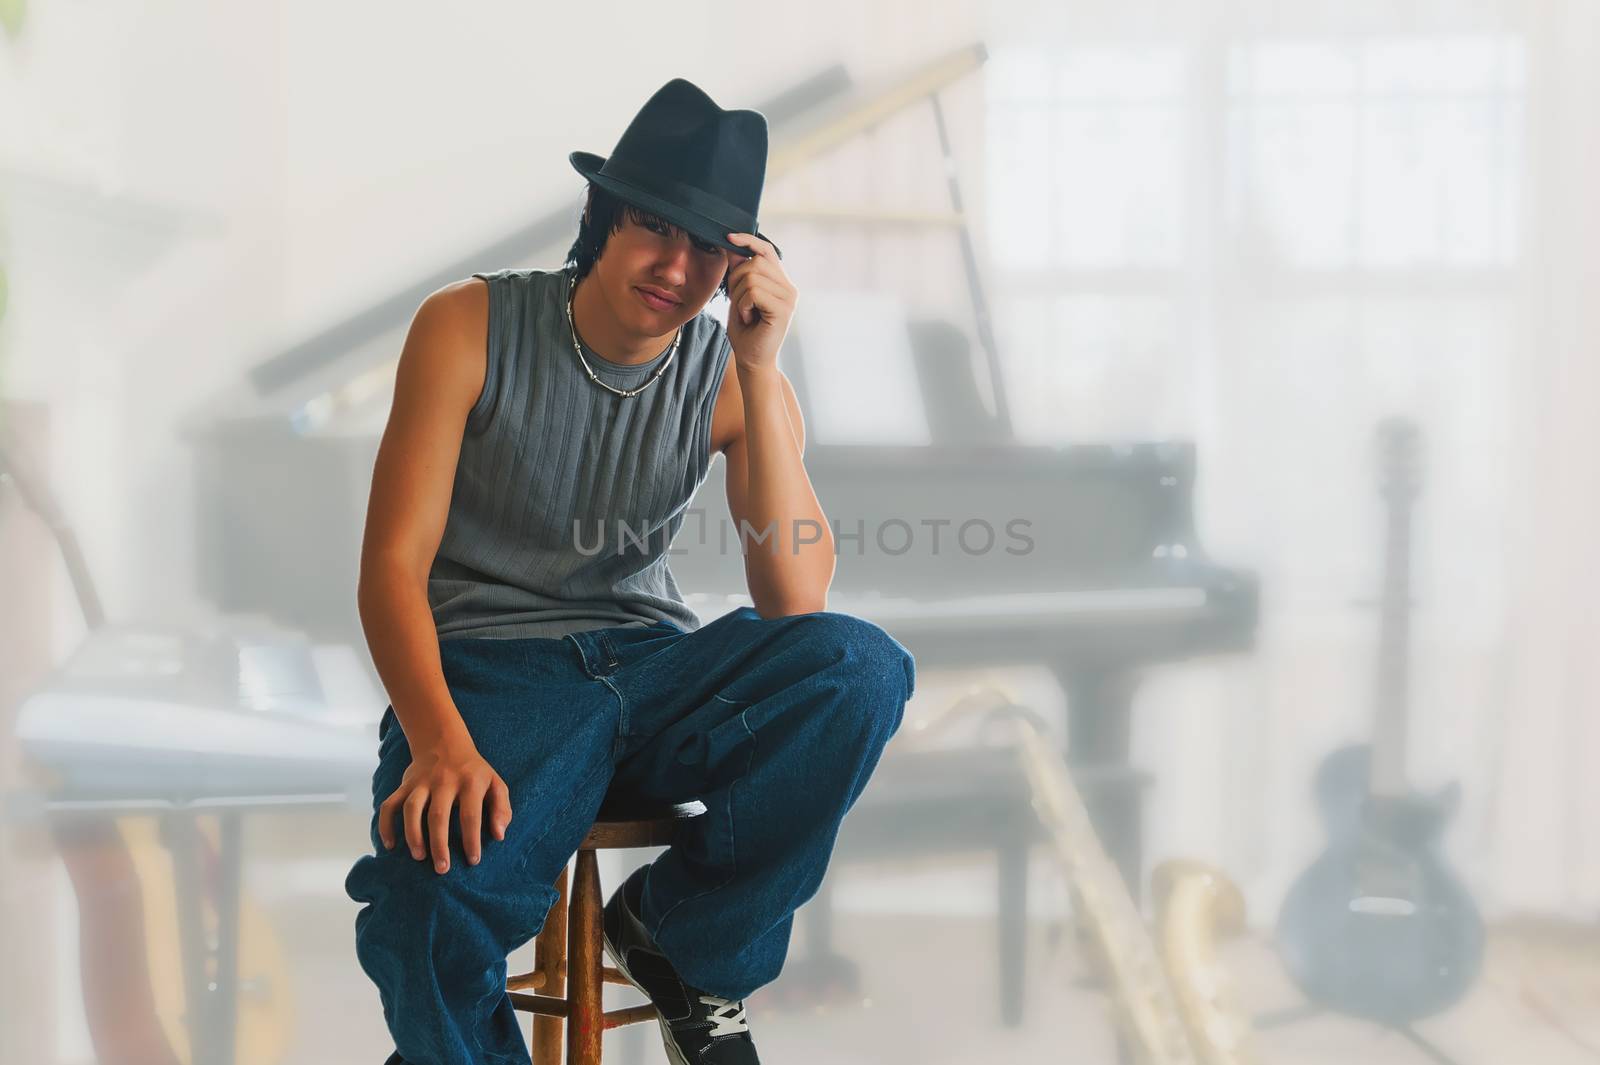 Young blues player resting during a jam session break, sitting on a stool wearing a black fedora.